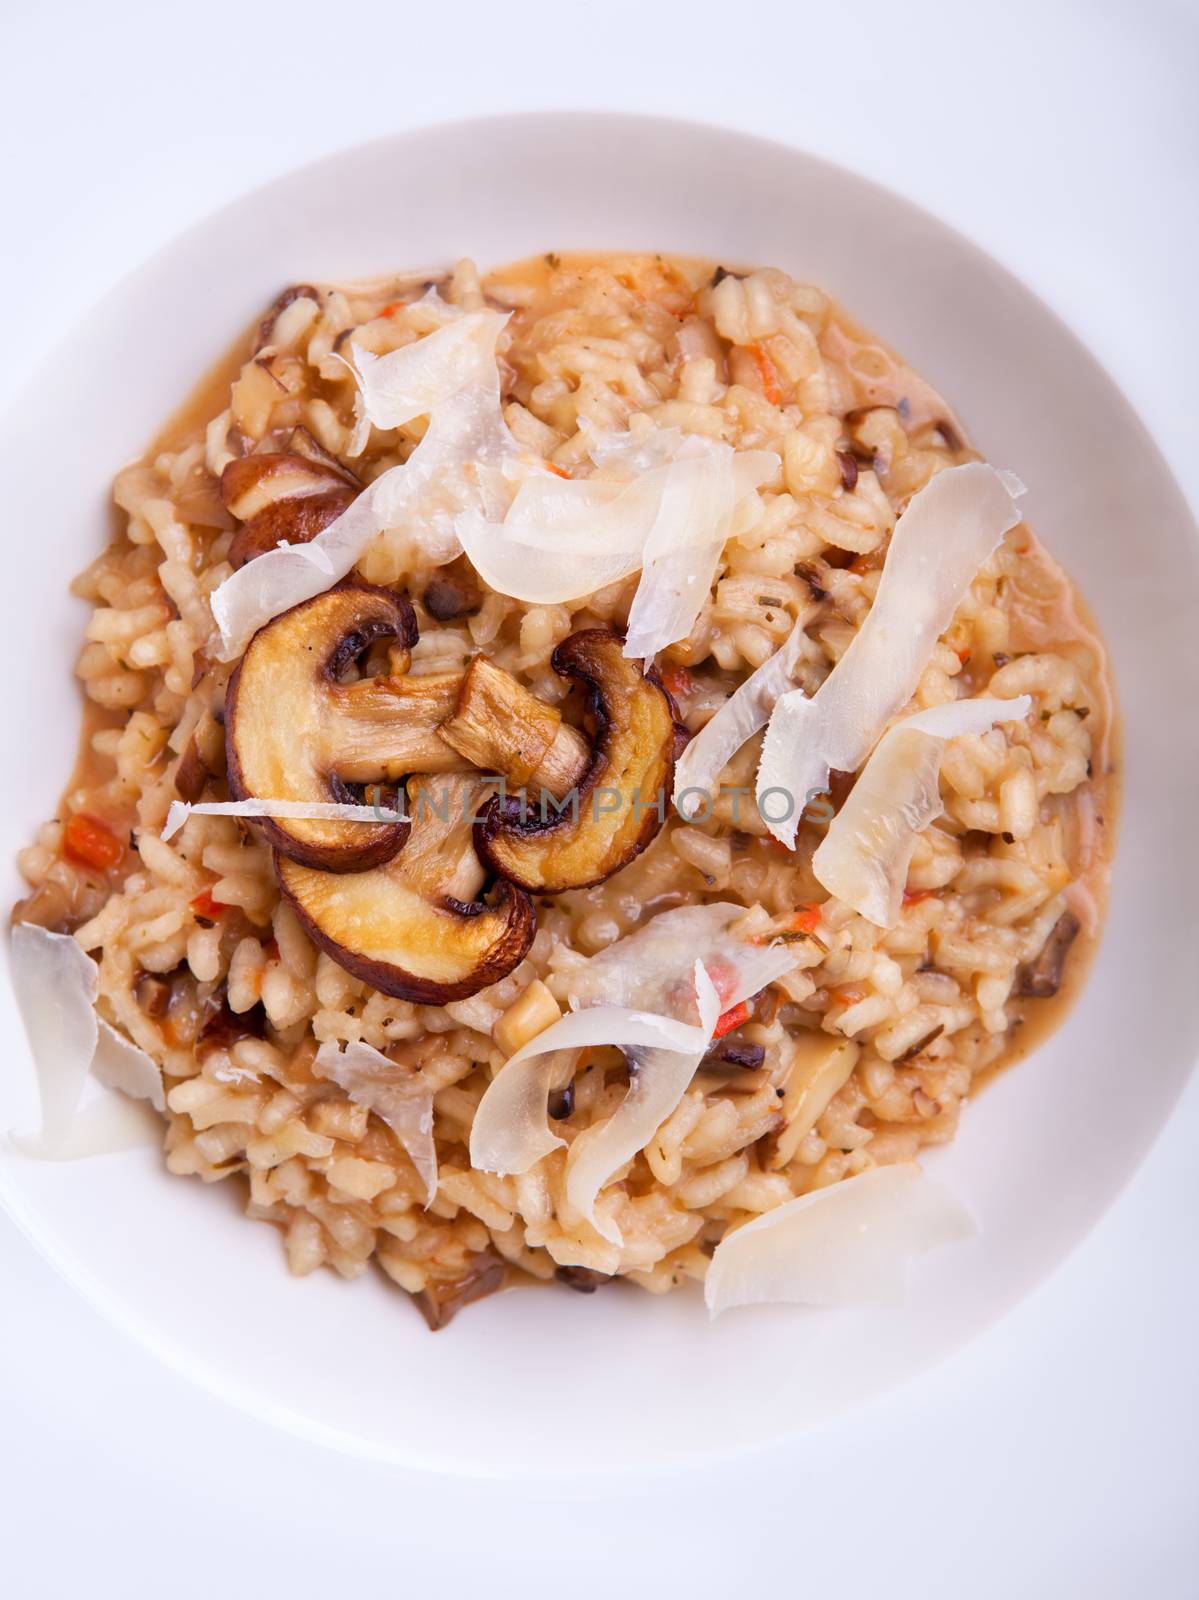 Mushroom risotto Italian cuisine placed on a white background